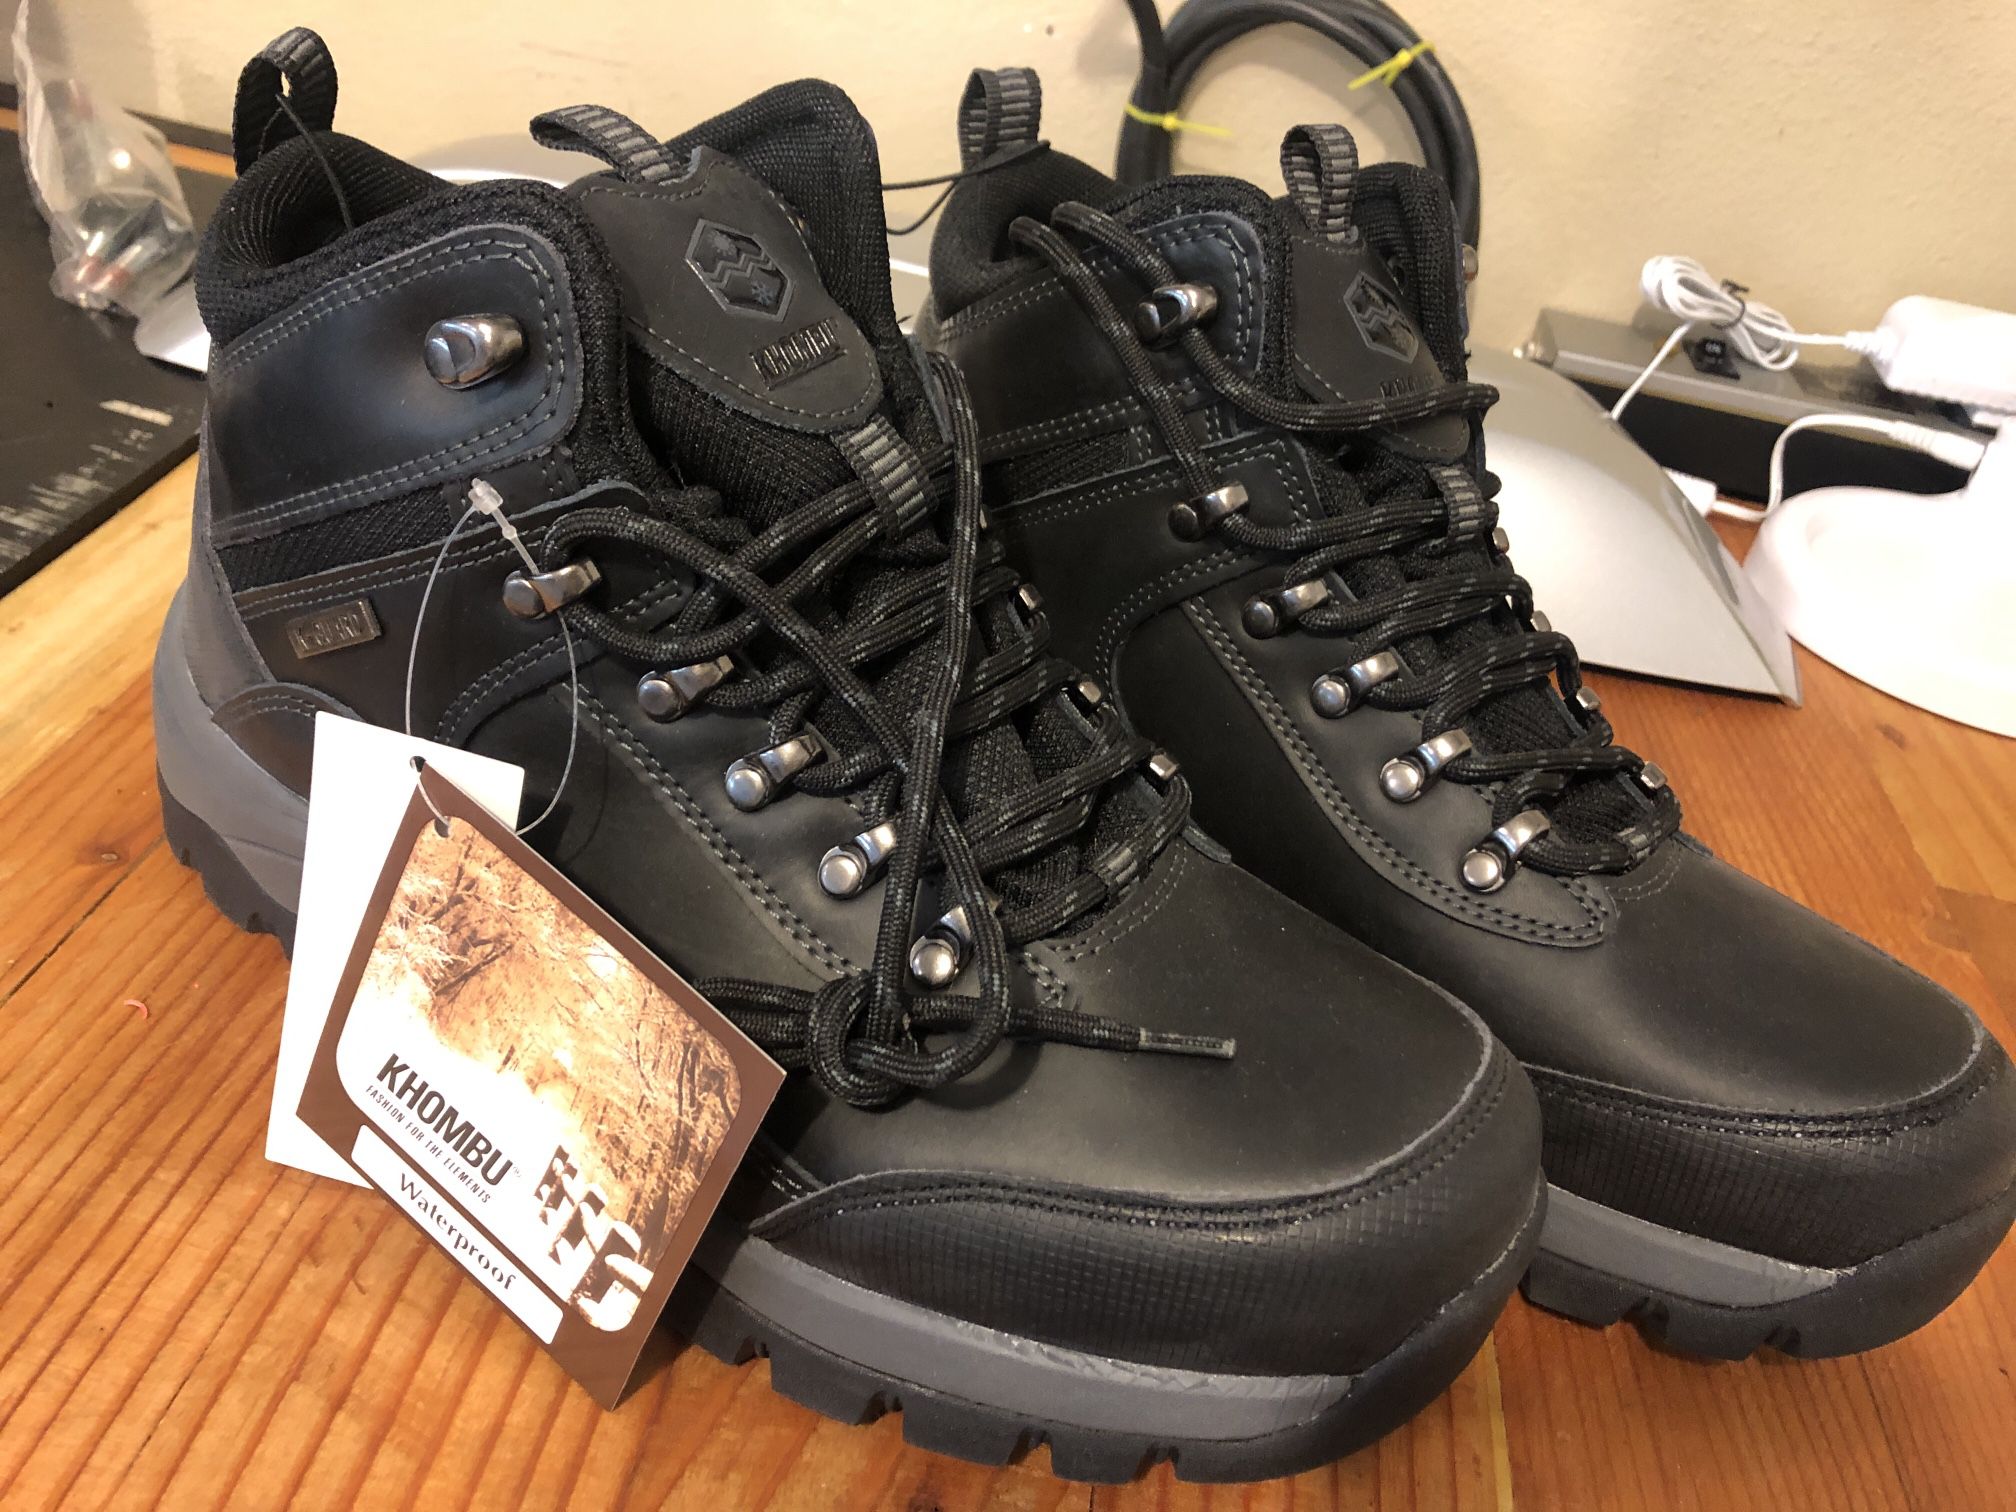 Full Genuine Leather Hiking Boots Size 9